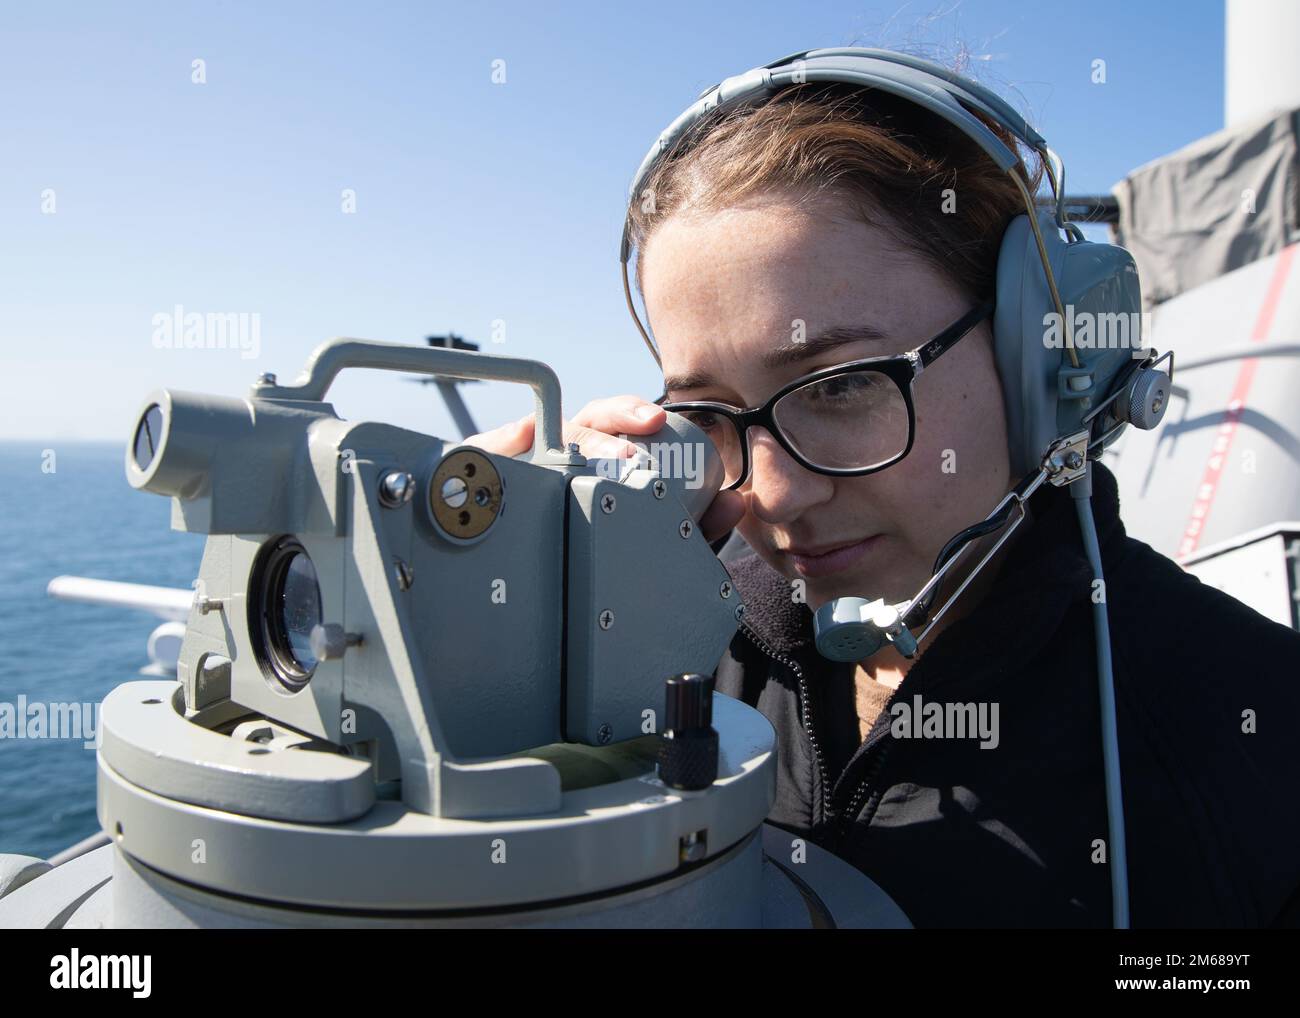 220418-N-TT639-2016 PACIFIC OCEAN (Apr. 18, 2022) – Quartermaster 3rd Class Kayla Nash, from New Braunfels, Texas, uses a telescopic alidade to determine amphibious assault ship USS Tripoli’s (LHA 7) position, April 18, 2022. Tripoli is underway conducting routine operations in U.S. 3rd Fleet. Stock Photo